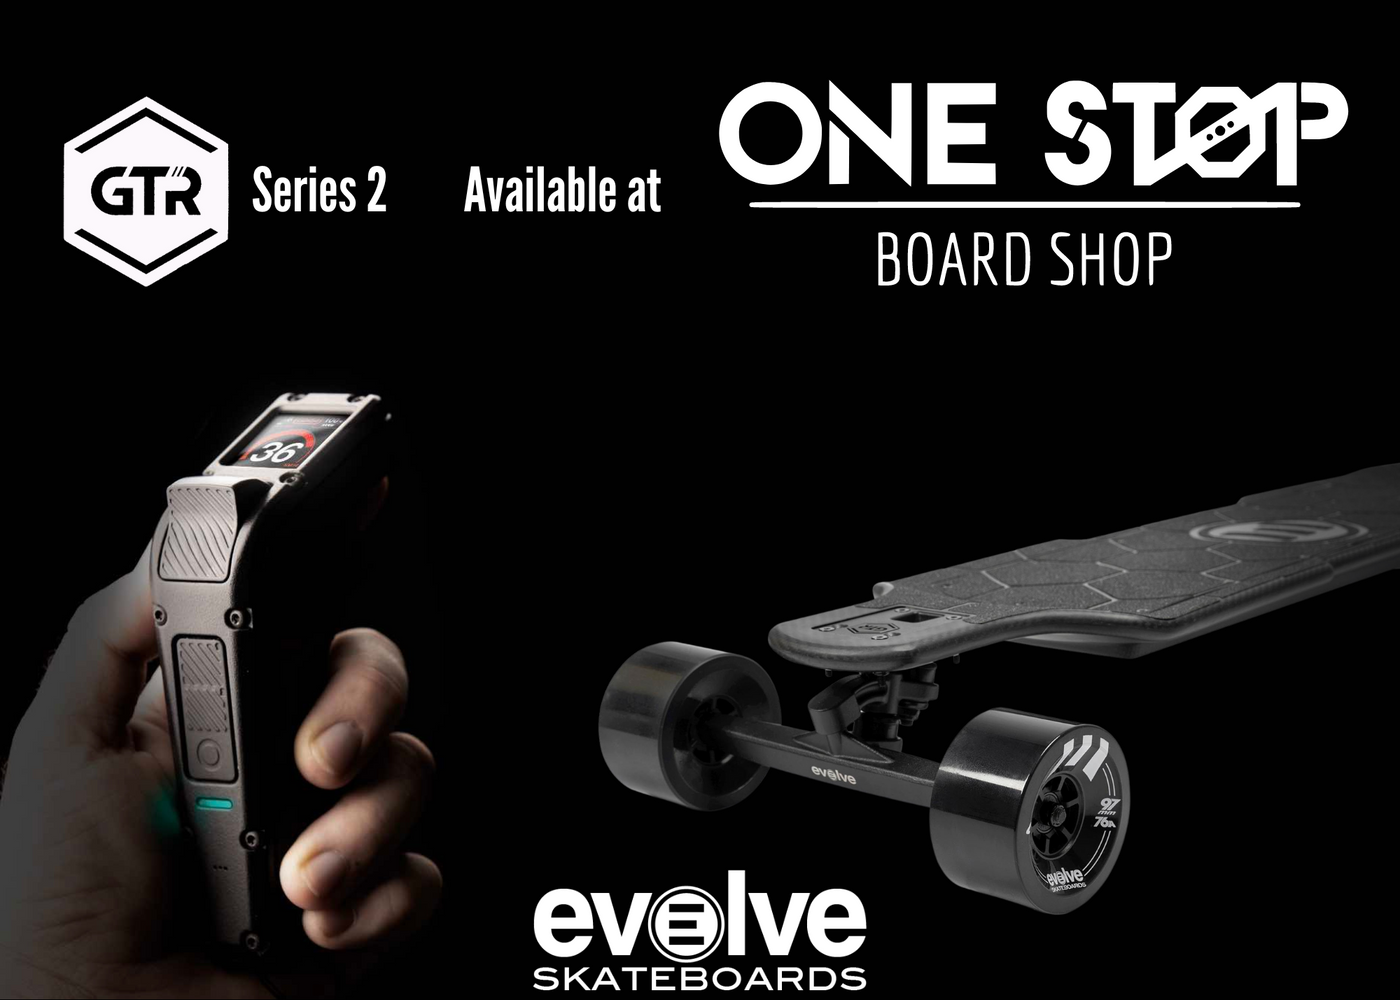 Say Hello To The Evolve GTR Series 2